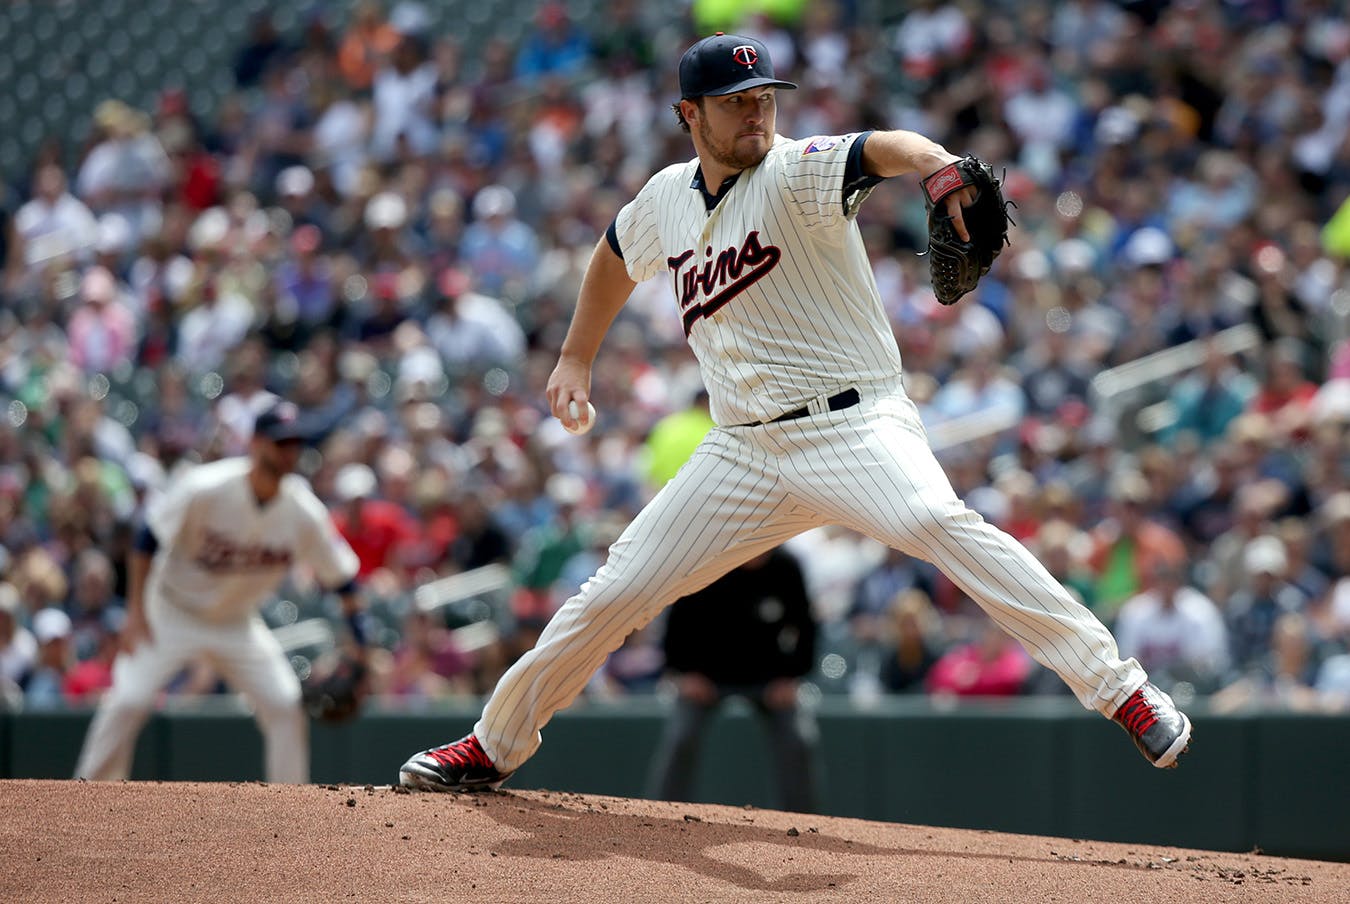 Twins righthander Phil Hughes says his fastball wasn't great during Saturday's 4-2 loss to the Indians, so he tried to use other pitches.